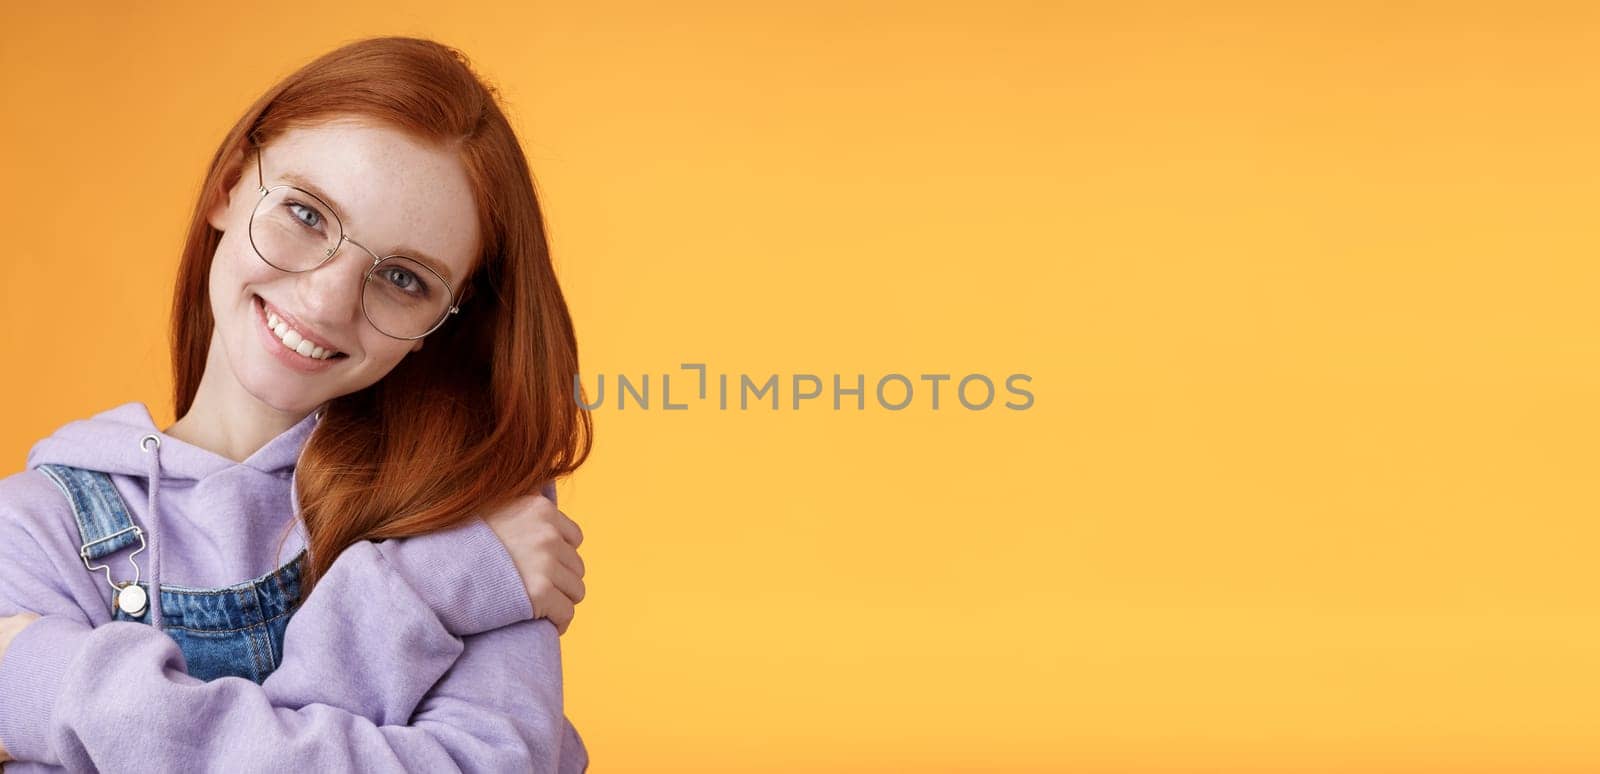 Passion, tenderness, wellbeing concept. Girl accept own self smiling charming grin tilt head hugging herself embracing body feel happiness delighted relaxing, flirty gaze camera orange background.